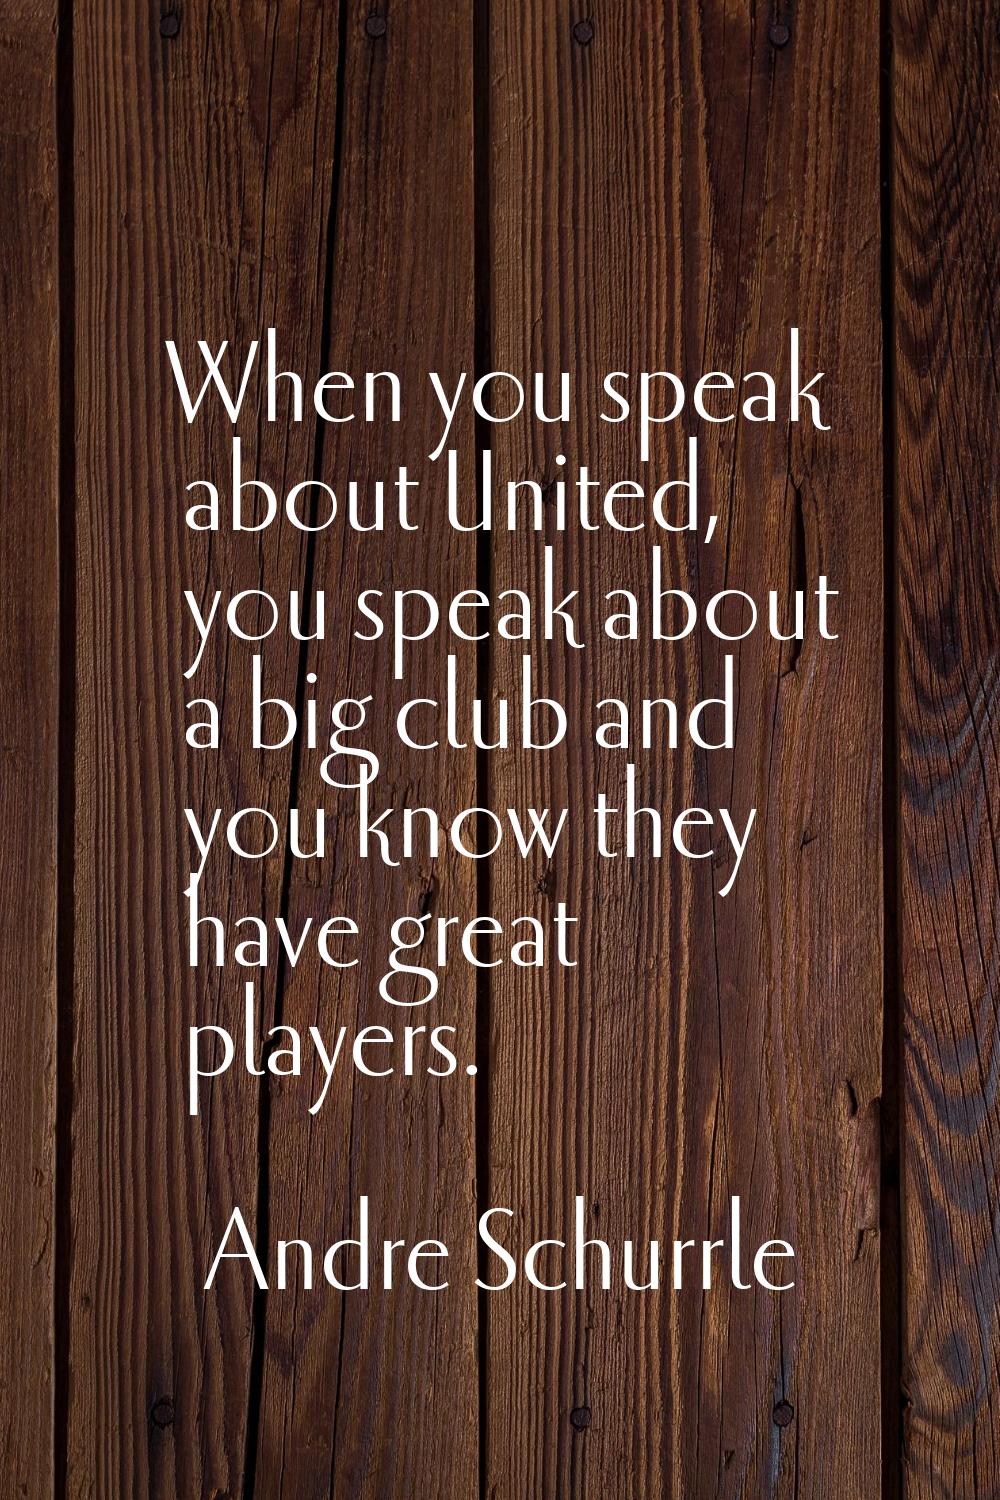 When you speak about United, you speak about a big club and you know they have great players.